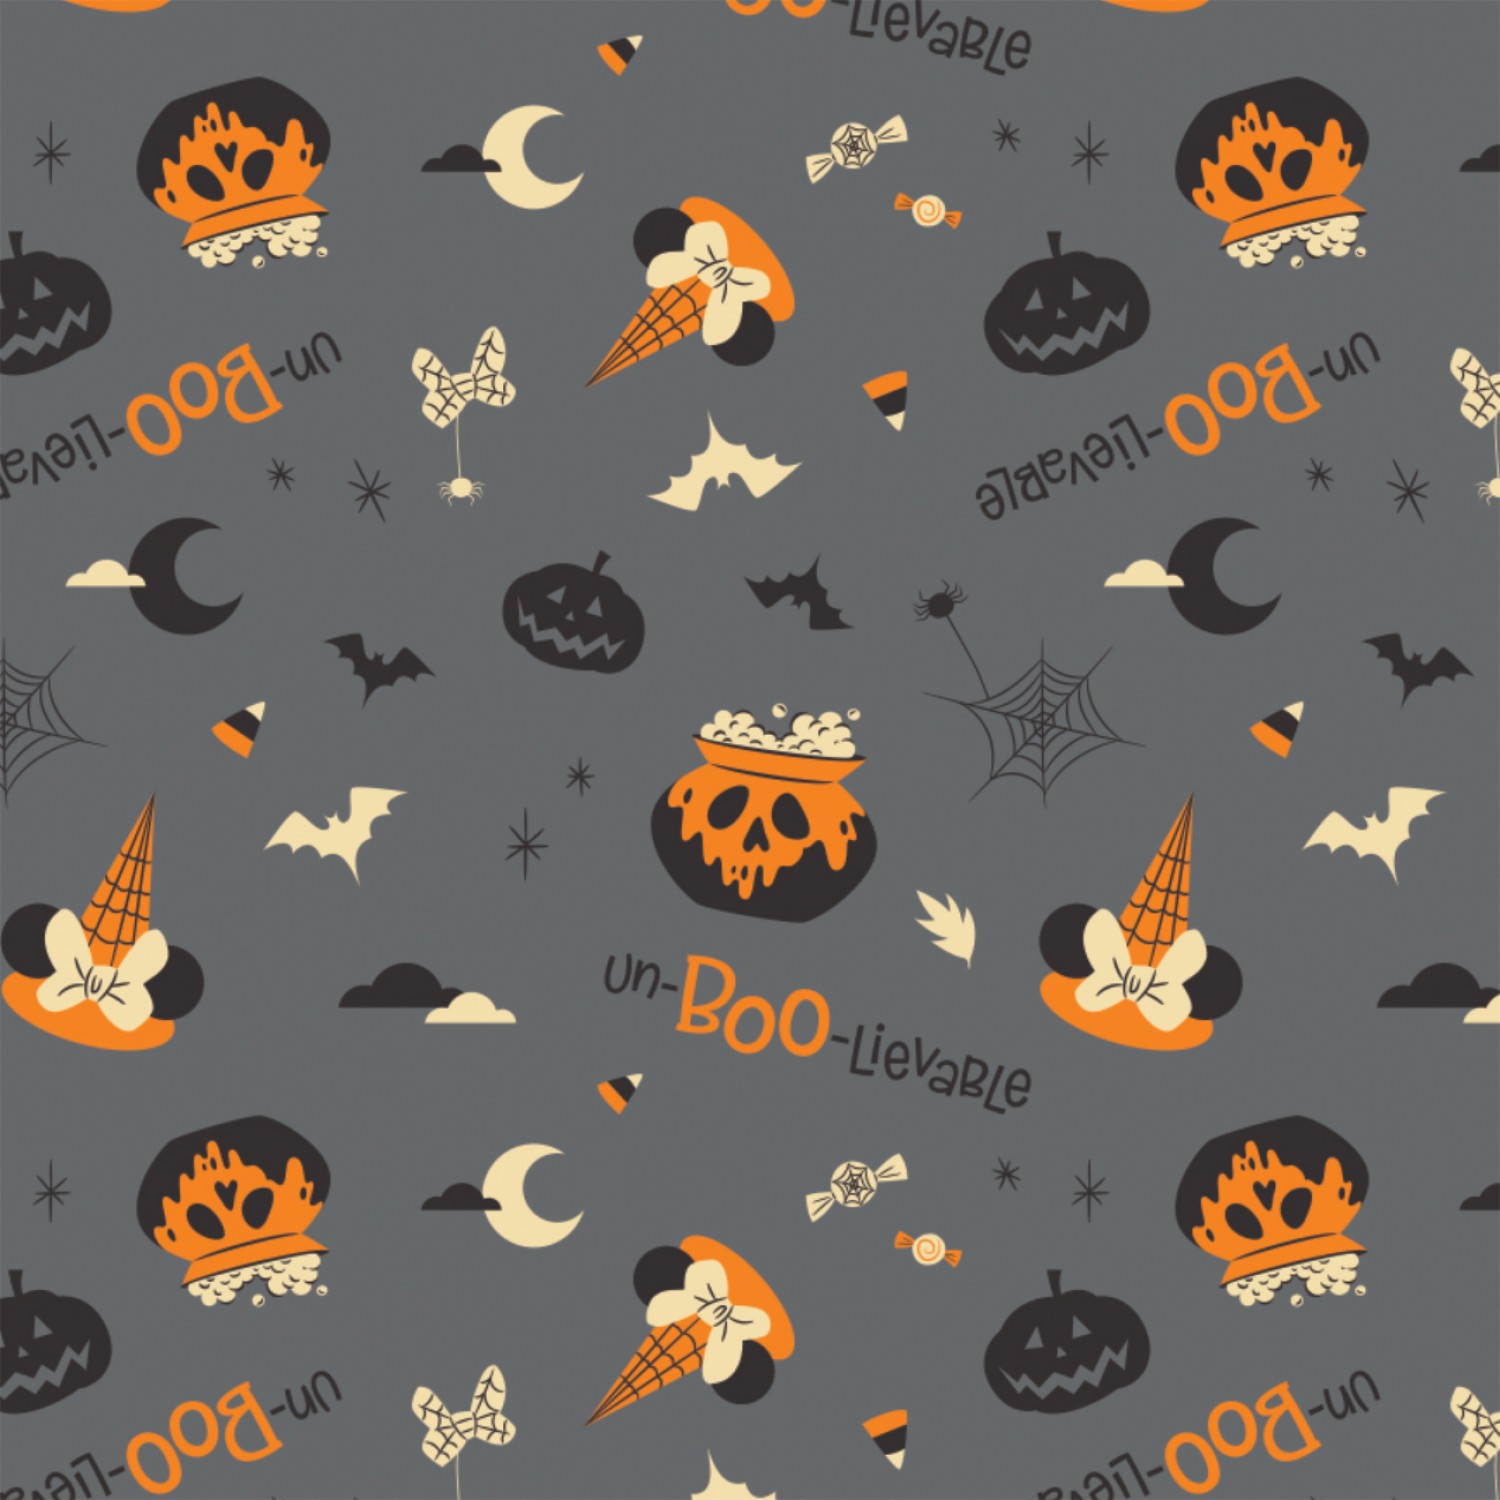 Disney Minnie Mouse Unboolievable Halloween Fabric - Grey